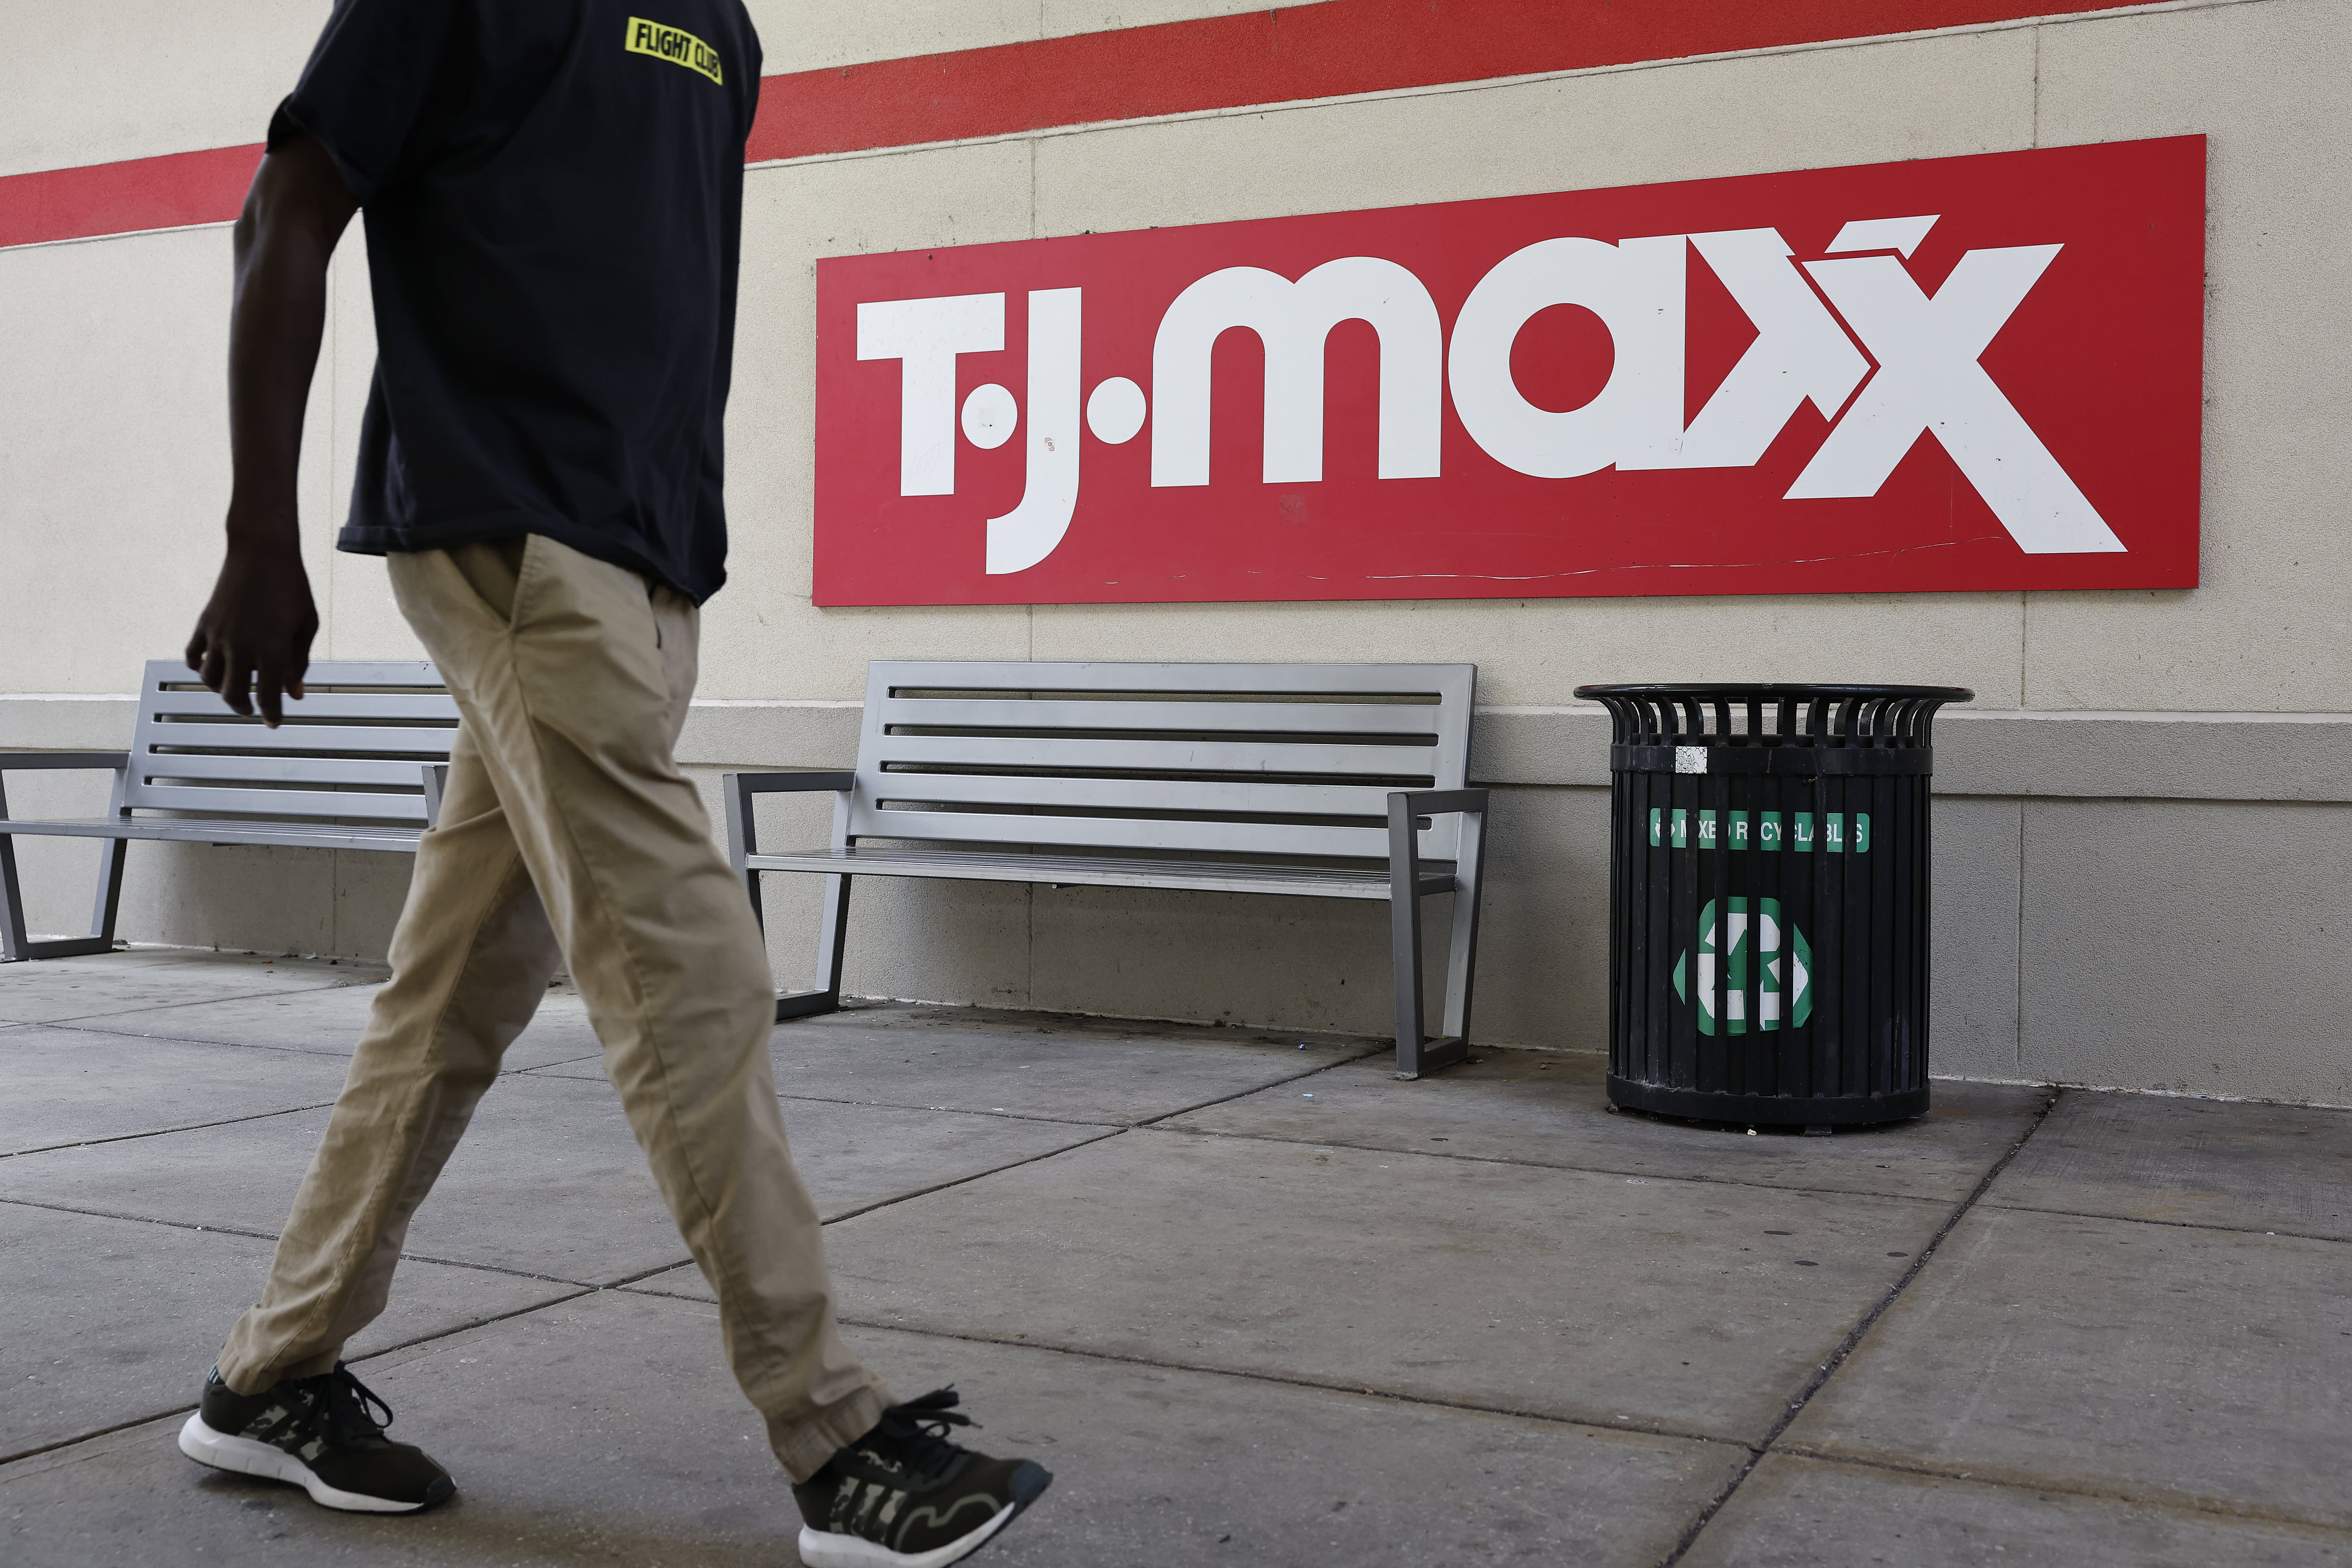 Bed Bath & Beyond’s potential bankruptcy would create long-term growth for off-price retailer and Club holding TJX